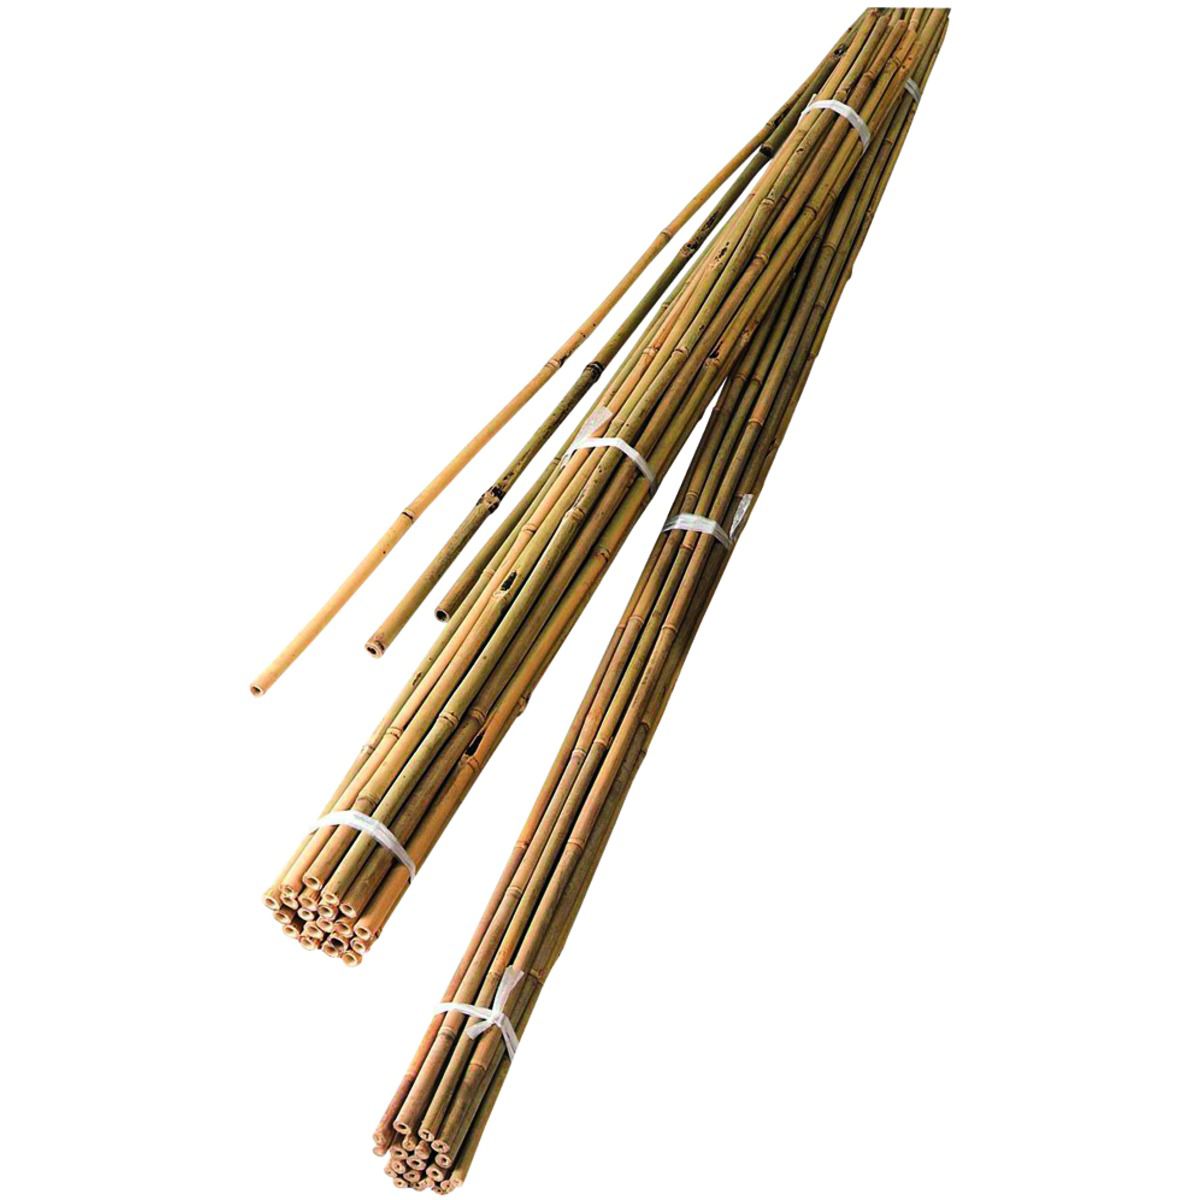 Image of Bamboo Canes 7ft 2.1m PK 10